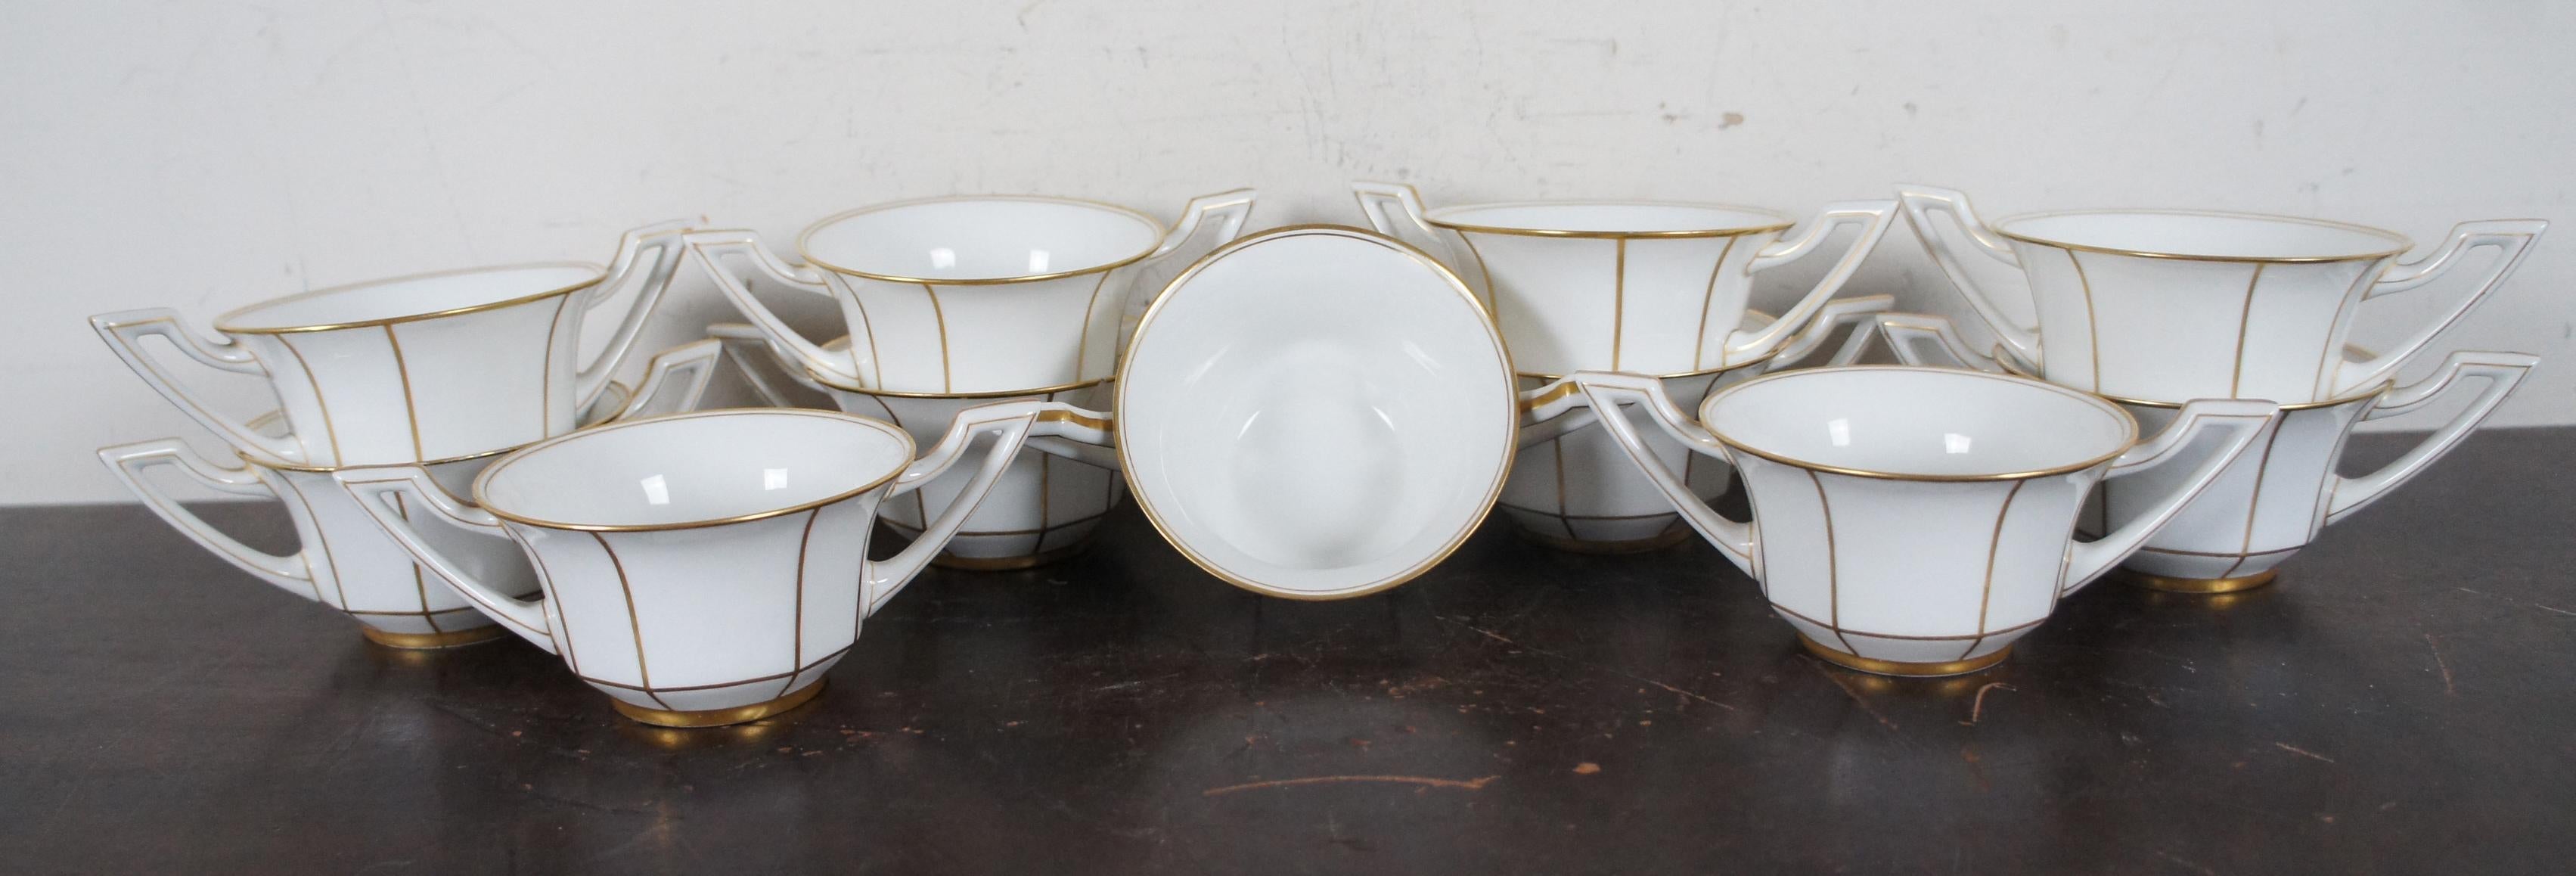 75 Antique French Jean Pouyat Limoges Porcelain China Dinner Service Set POY254 1